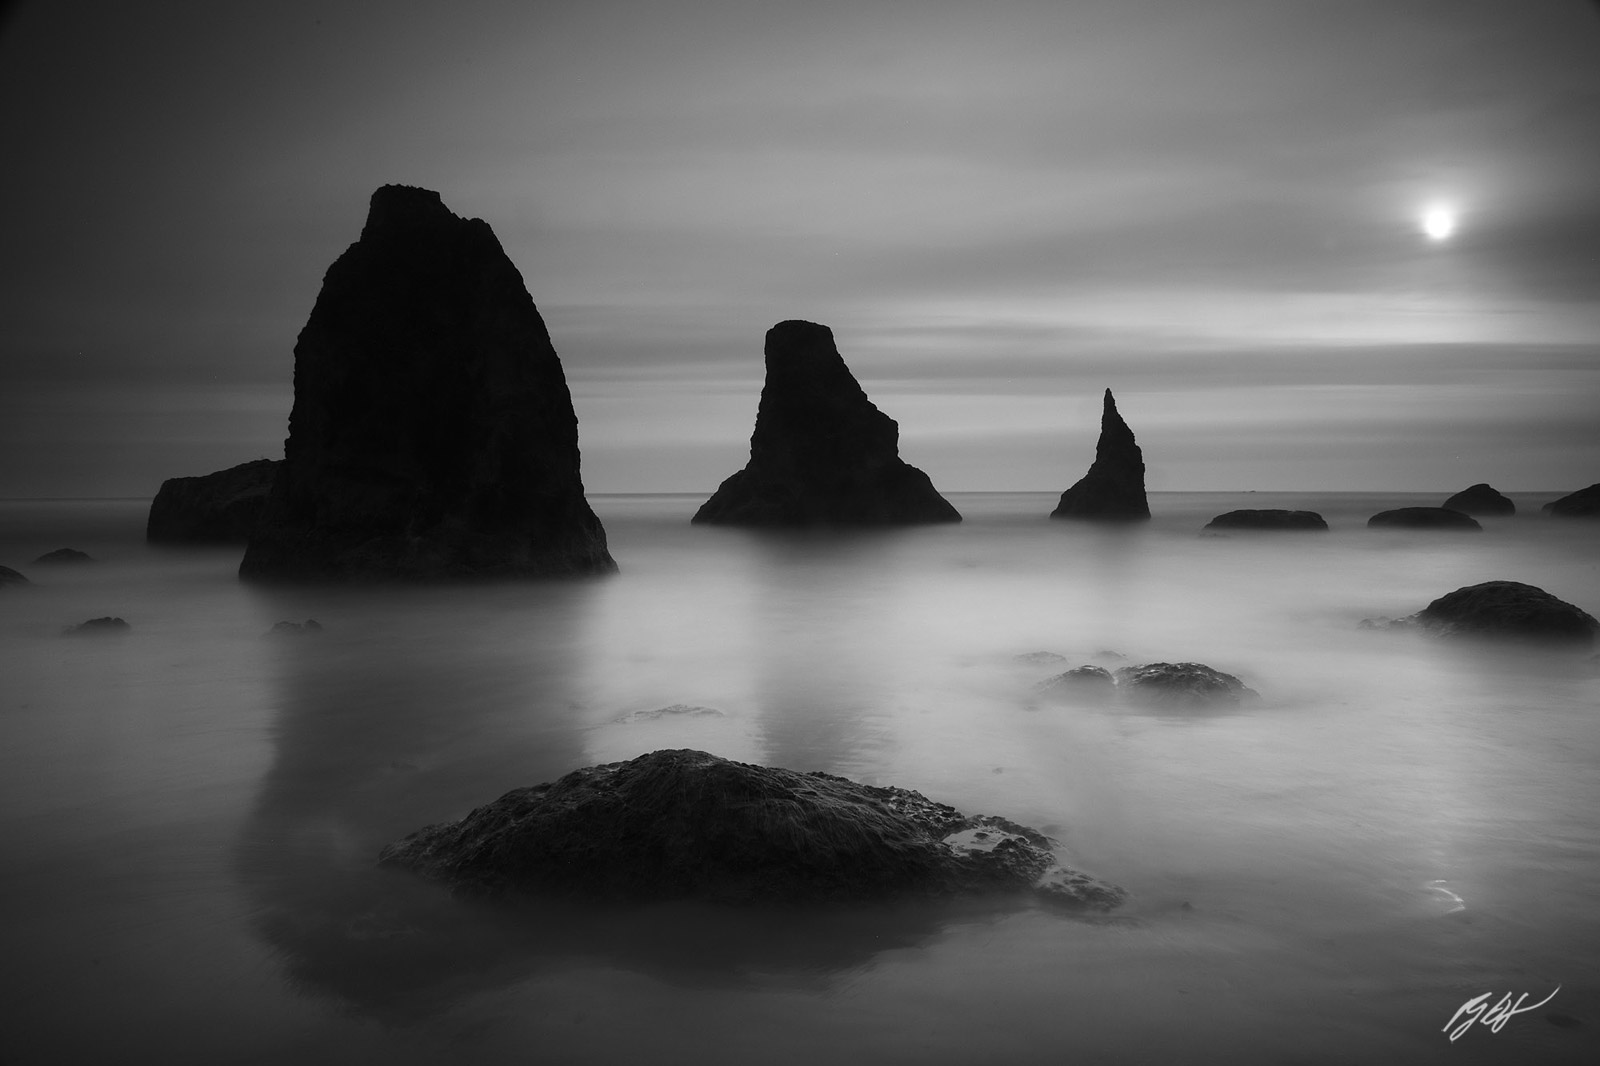 Floating Sea Stacks from Face Rock Beach in Bandon Oregon